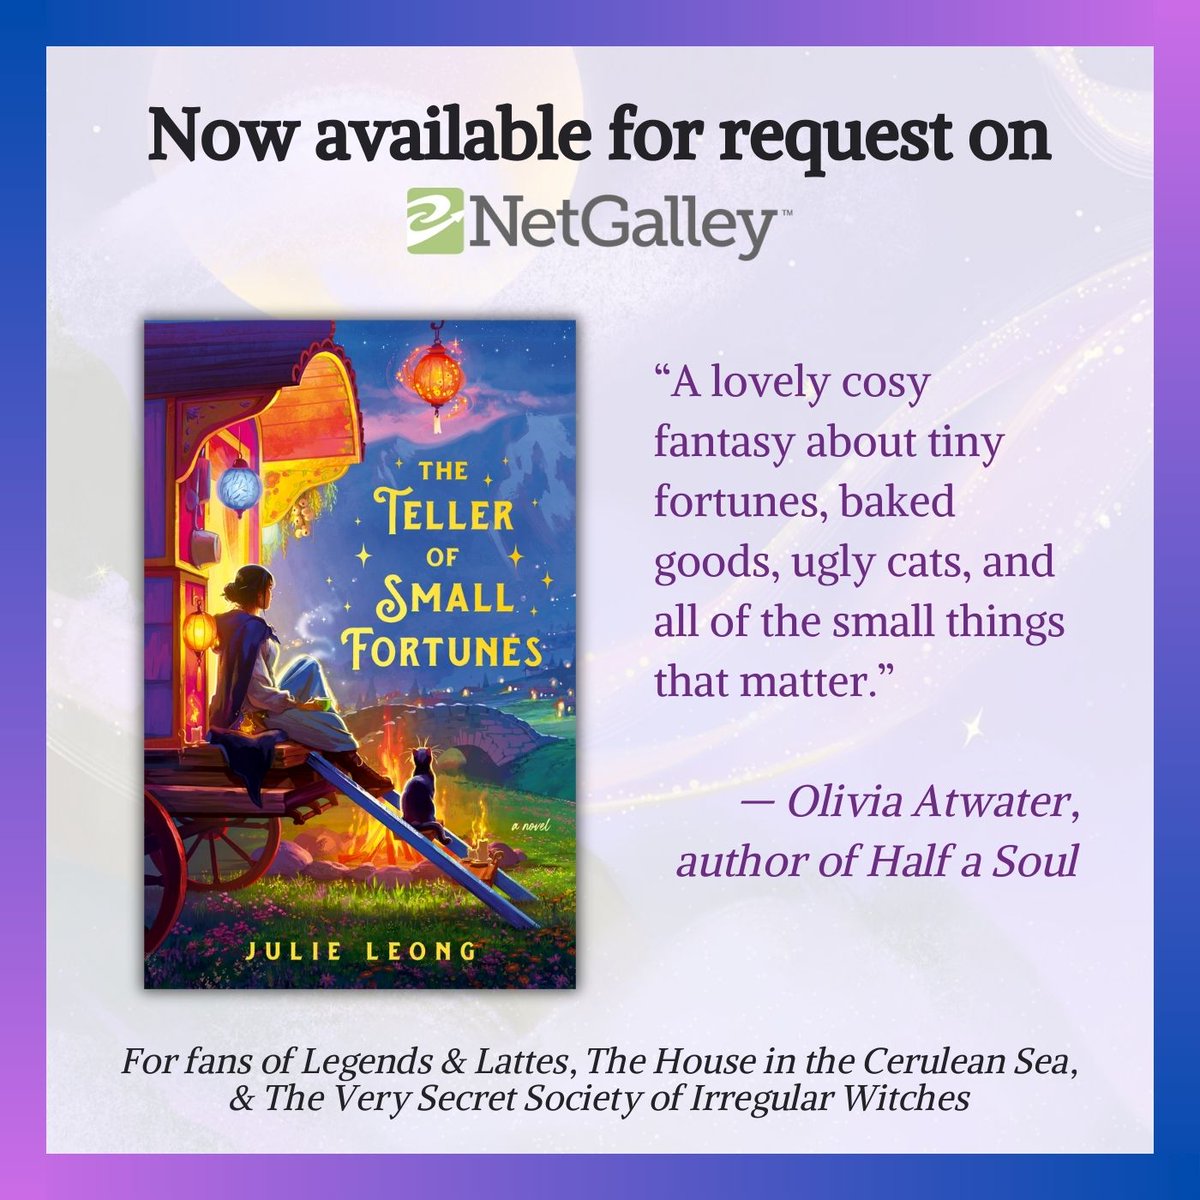 ✨🔮The Teller of Small Fortunes is now available on NetGalley!🔮✨ If you like cozy fantasy with found family, crackling campfires, magical cats, and a dash of bittersweet diaspora feels, I hope you'll enjoy Tao's story. Link to request (also in bio): netgalley.com/catalog/book/3…